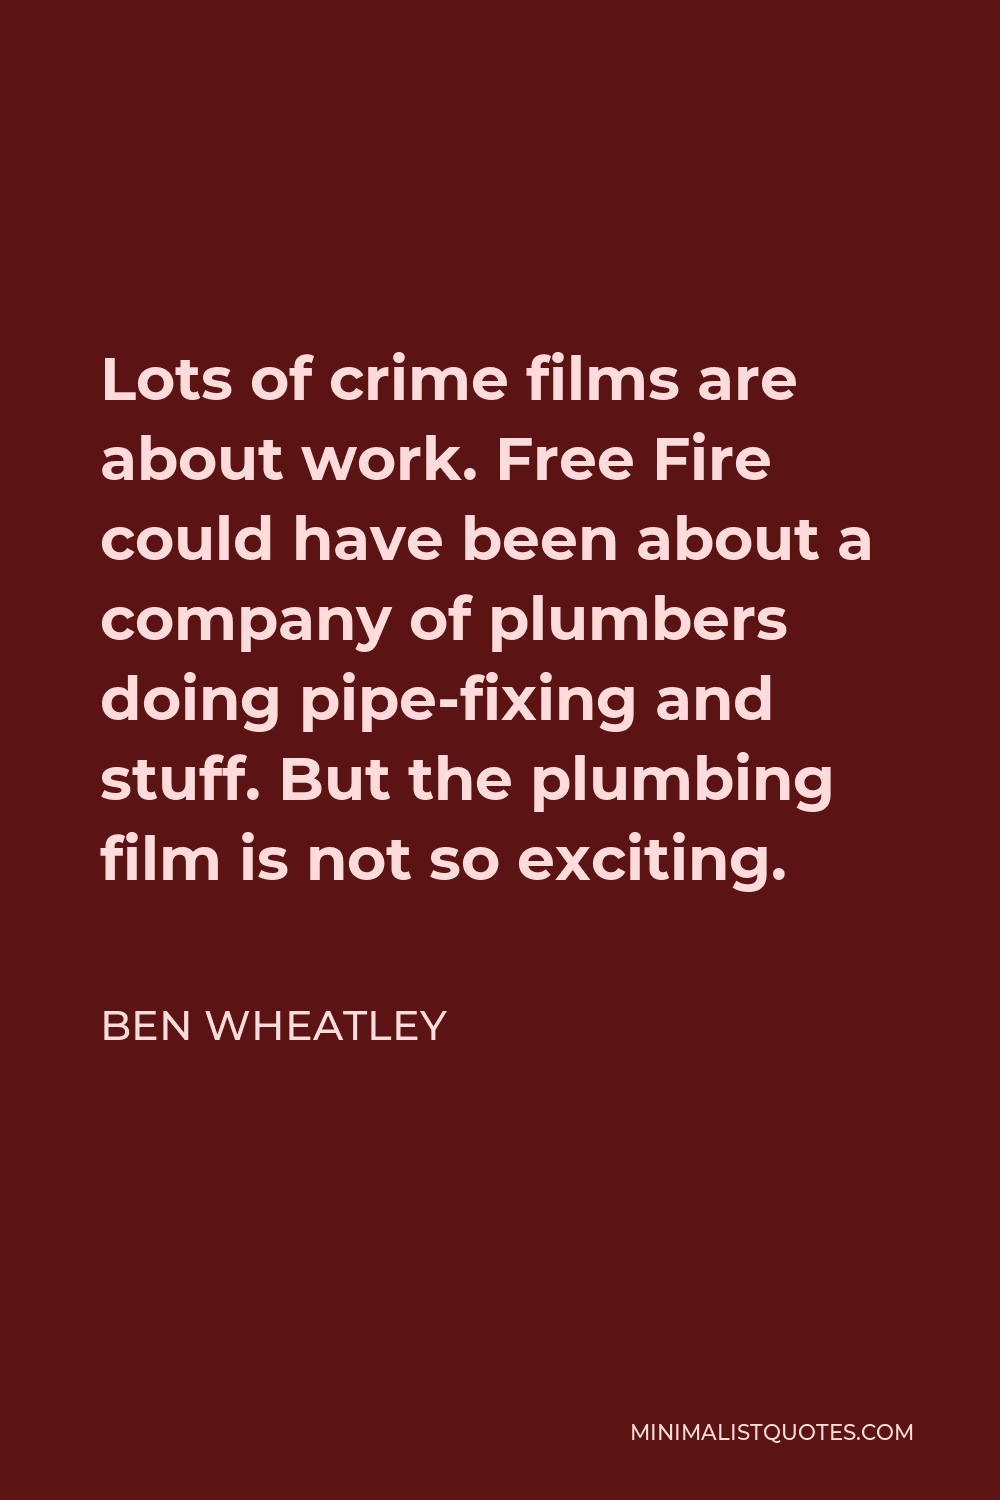 Ben Wheatley Quote - Lots of crime films are about work. Free Fire could have been about a company of plumbers doing pipe-fixing and stuff. But the plumbing film is not so exciting.